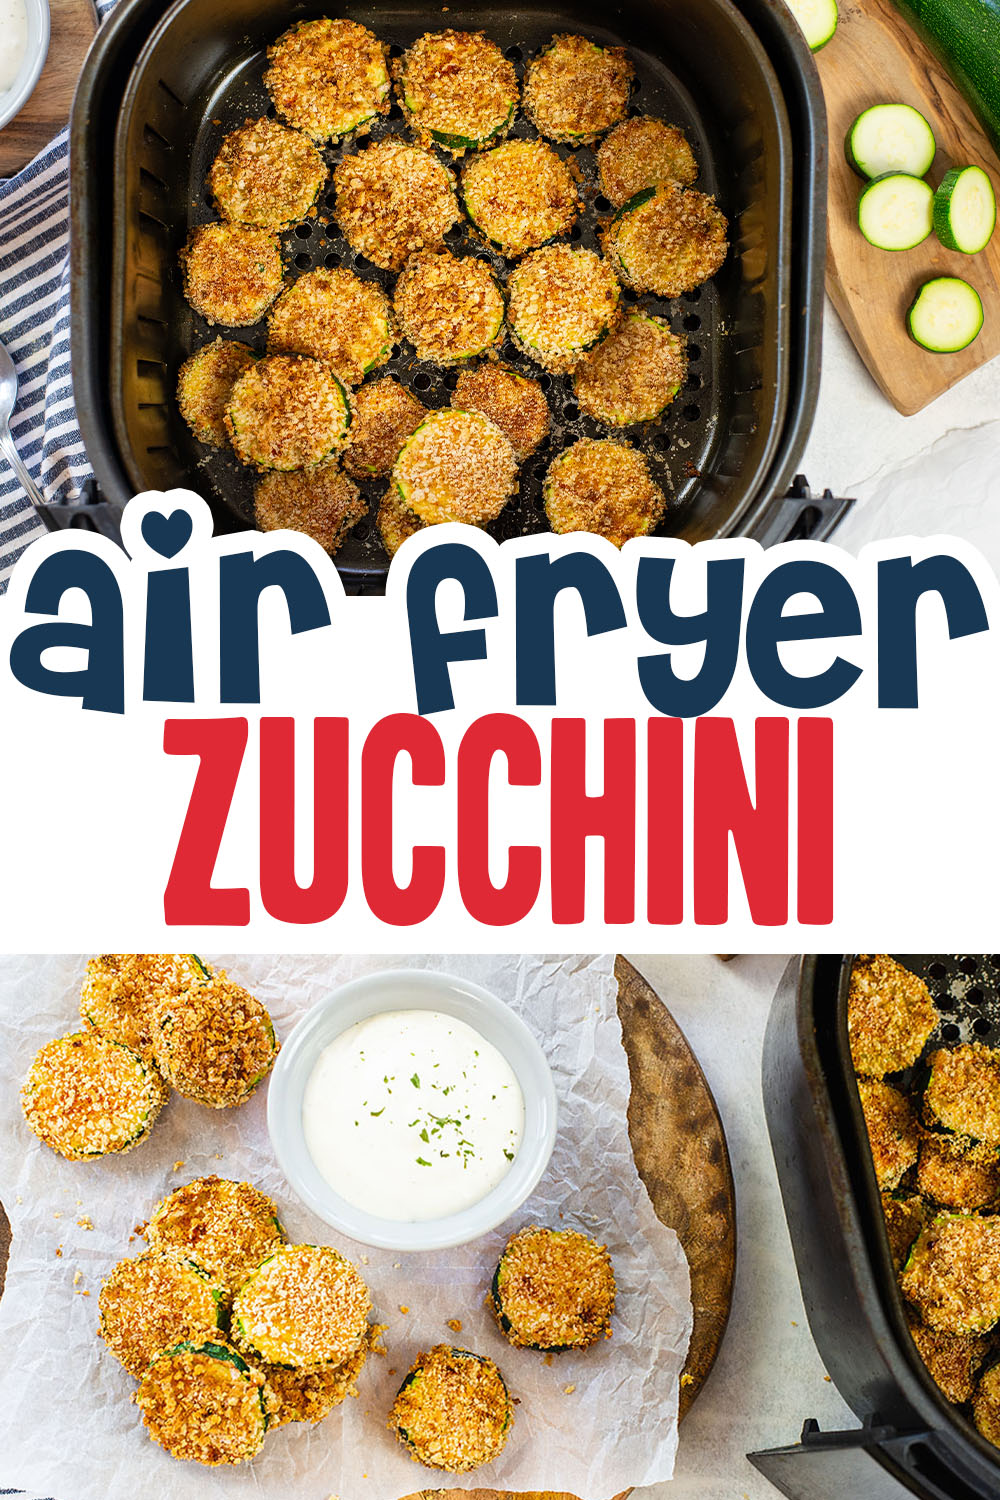 Using the air fryer for zucchini chips is a great way to make the zucchini healthier and tastier than deep frying it!